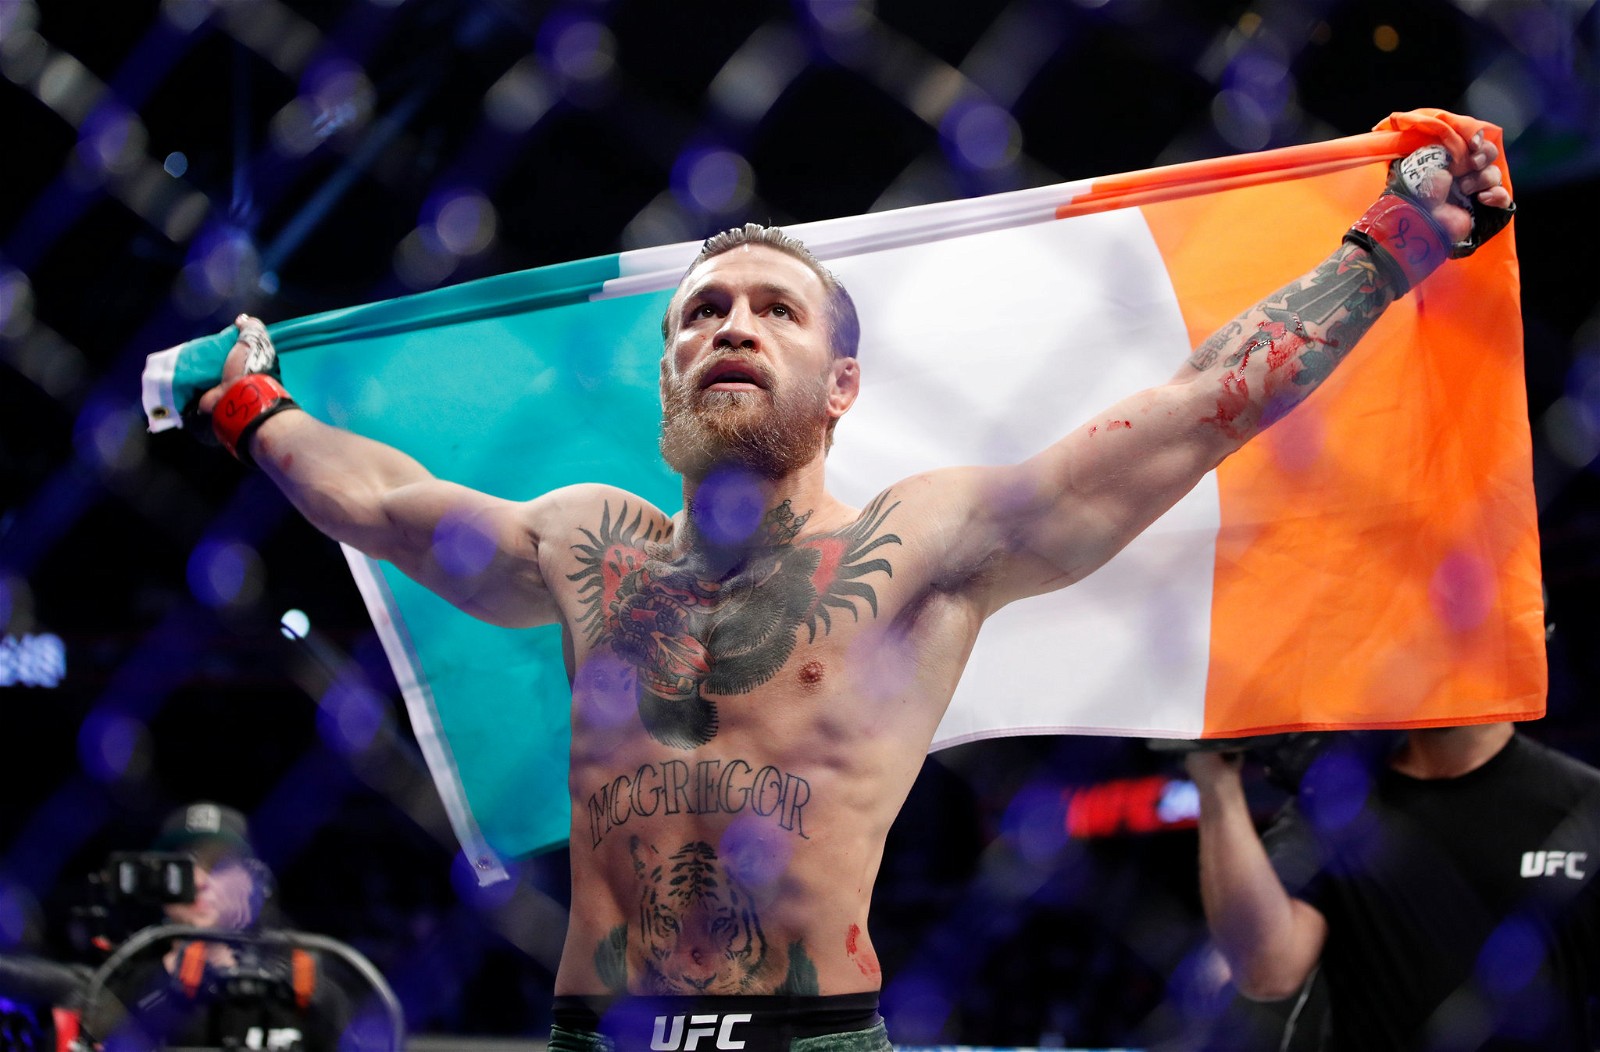 McGregor reclaims the throne at UFC 246